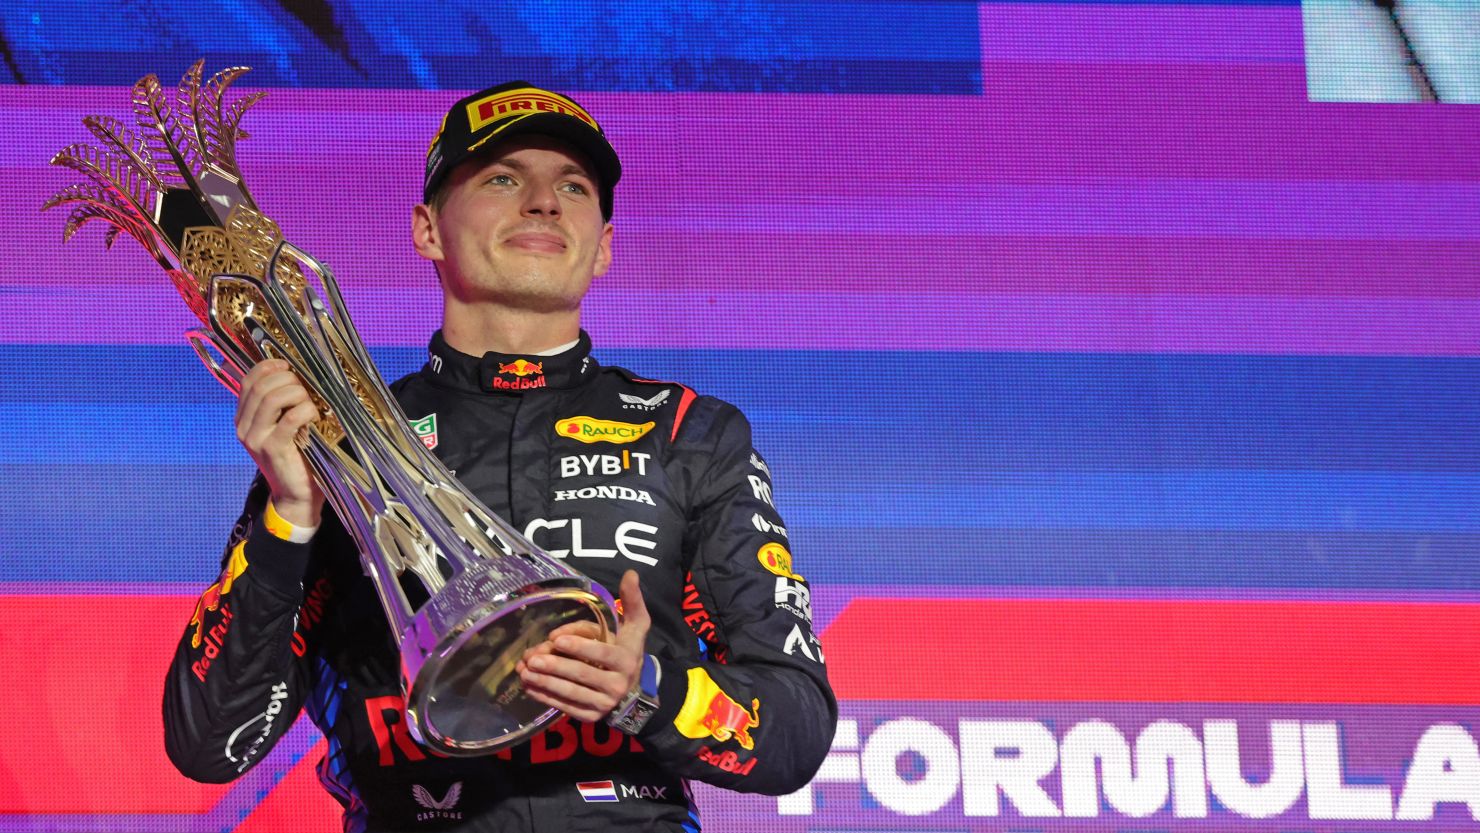 Max Verstappen cruised to victory once again at the Saudi Arabian Grand Prix.